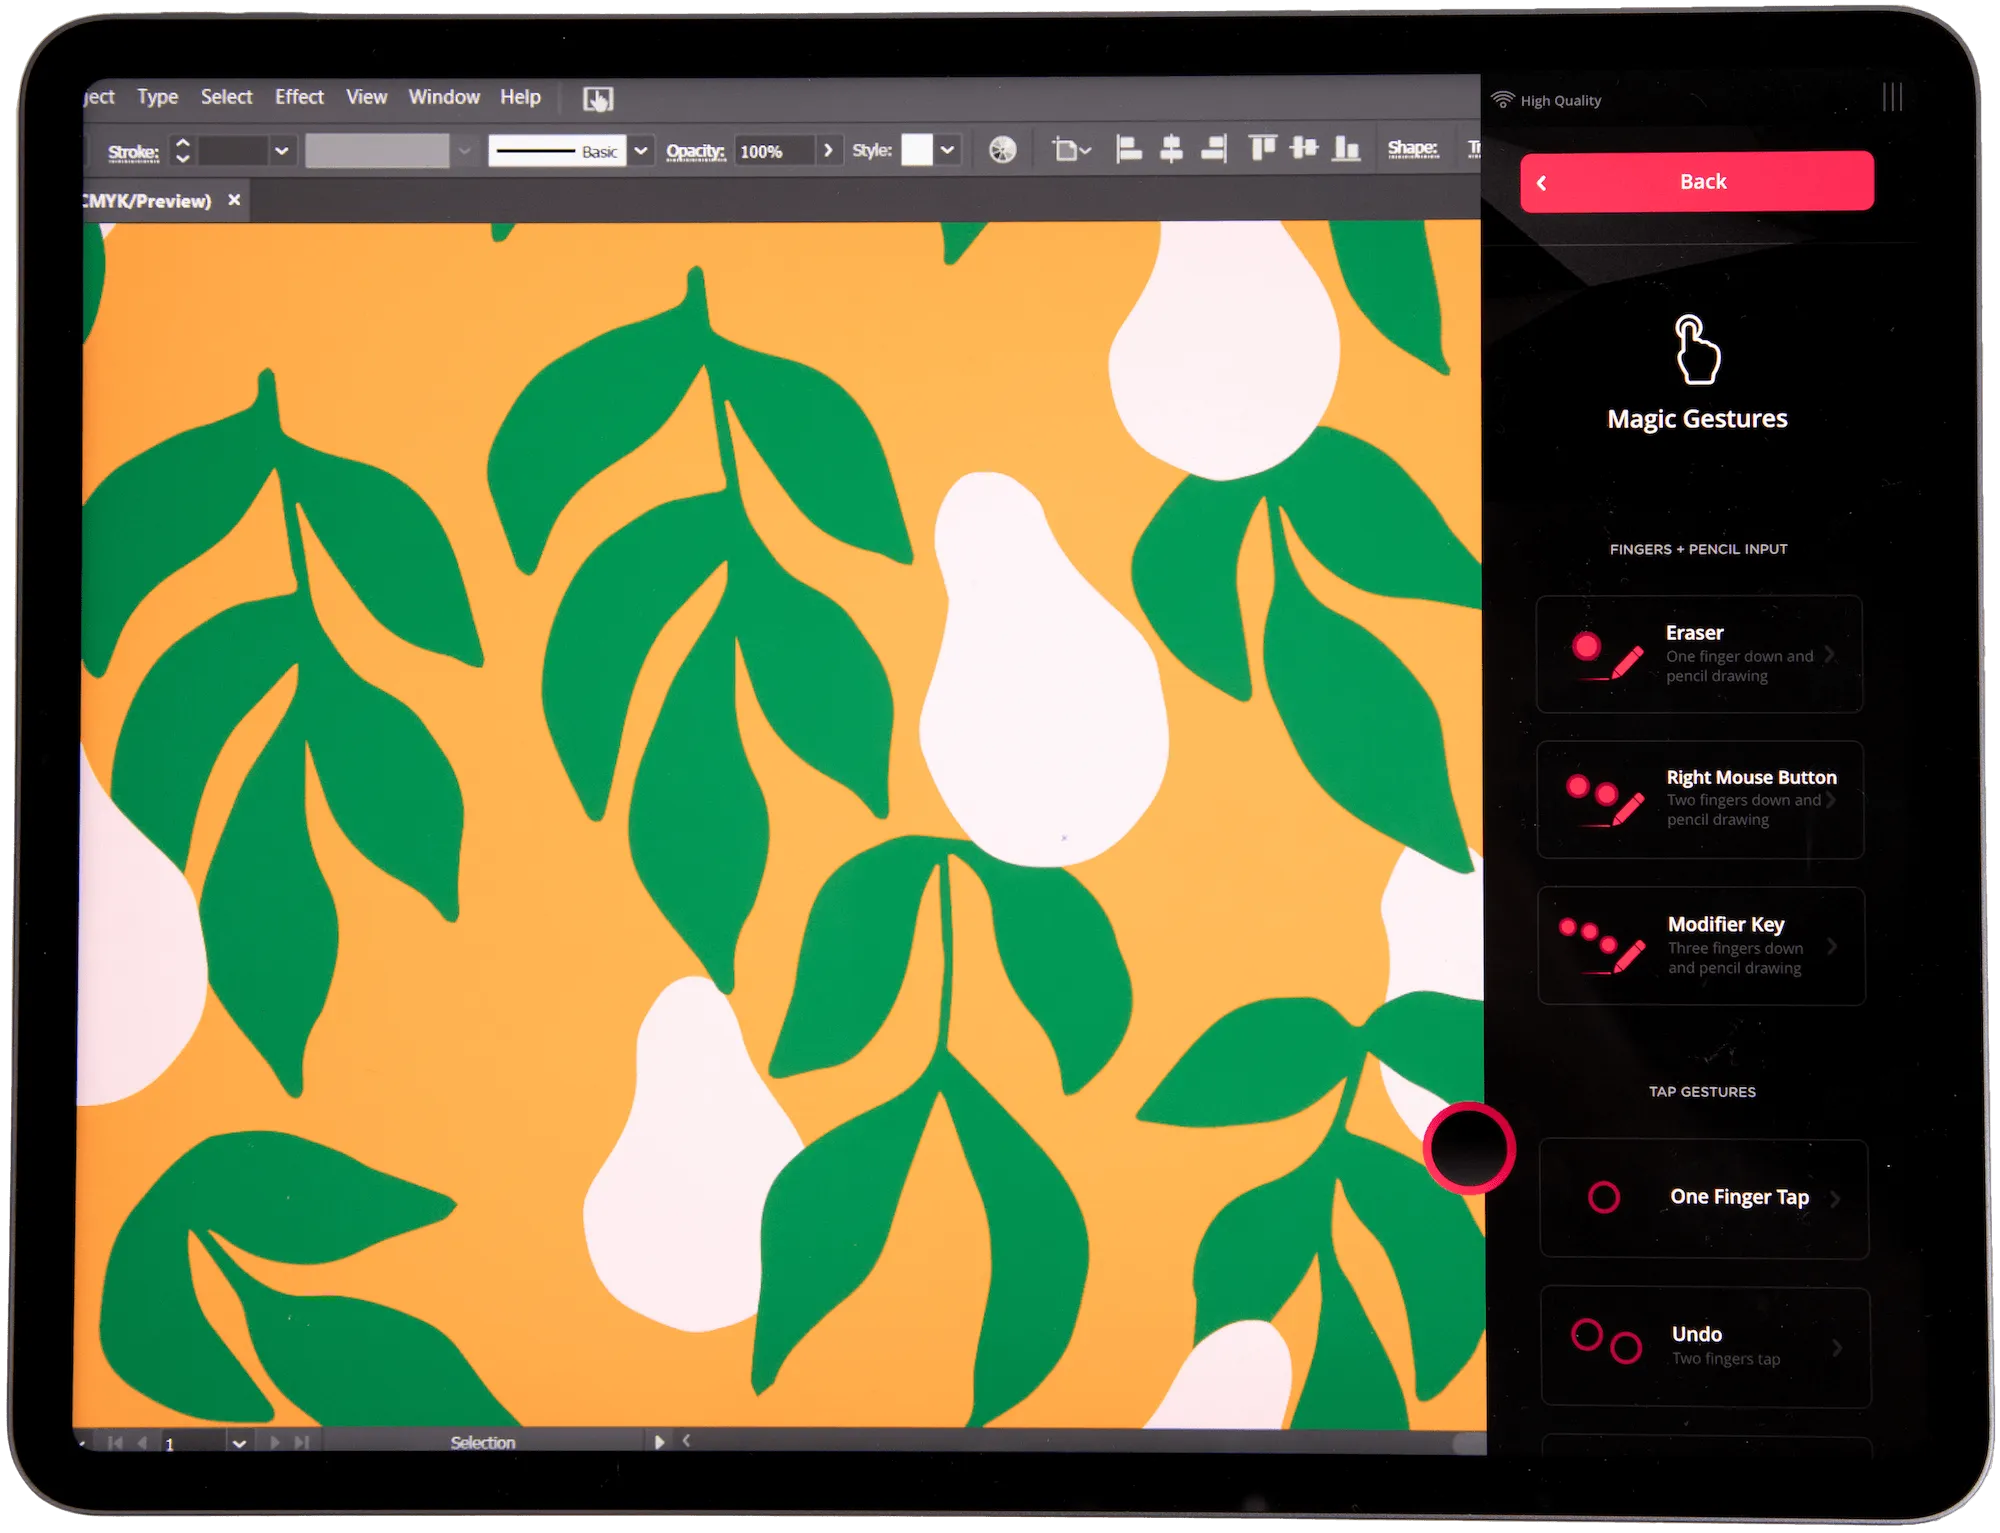 An iPad with an illustration of a fruit pattern showing the Astropad Studio UI